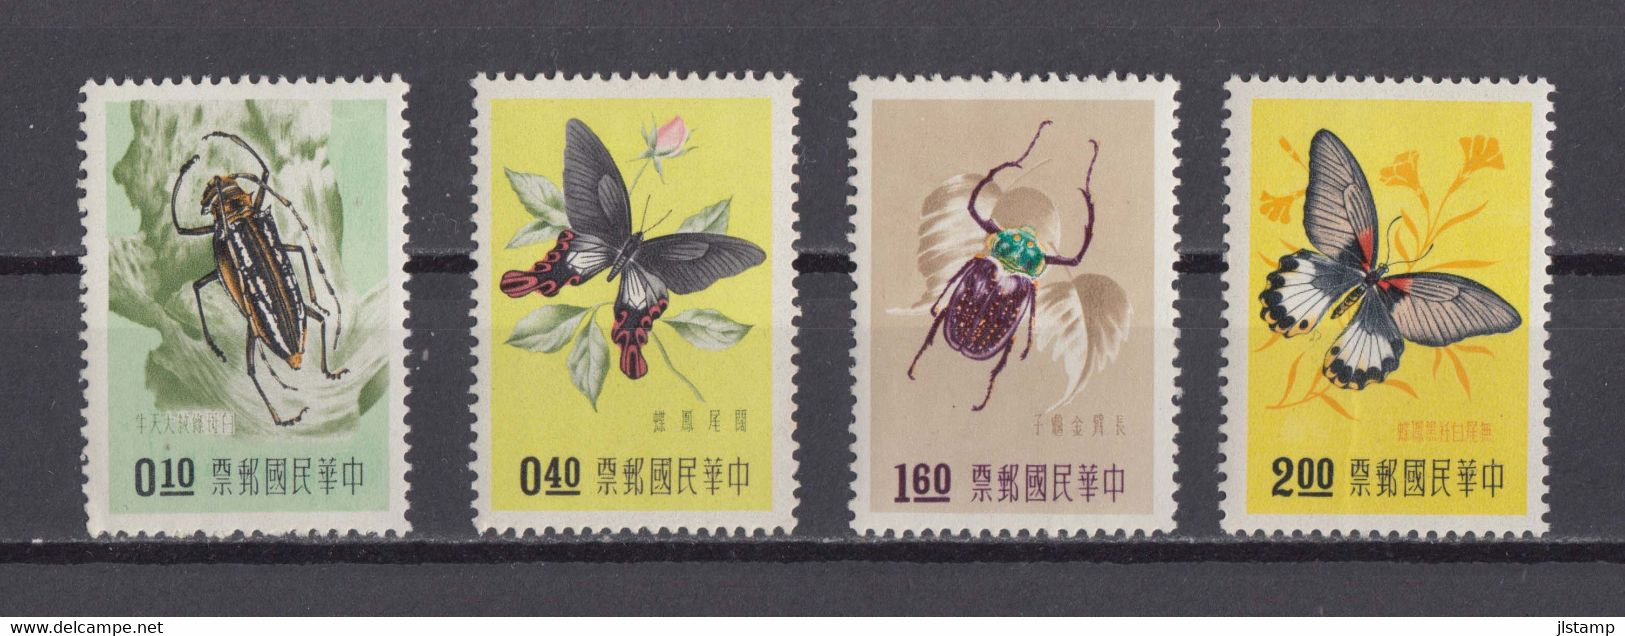 China Taiwan 1958 Insect And Butterfly Stamps 4v,Scott# 1183-1188,OG,MNH,VF - Ungebraucht